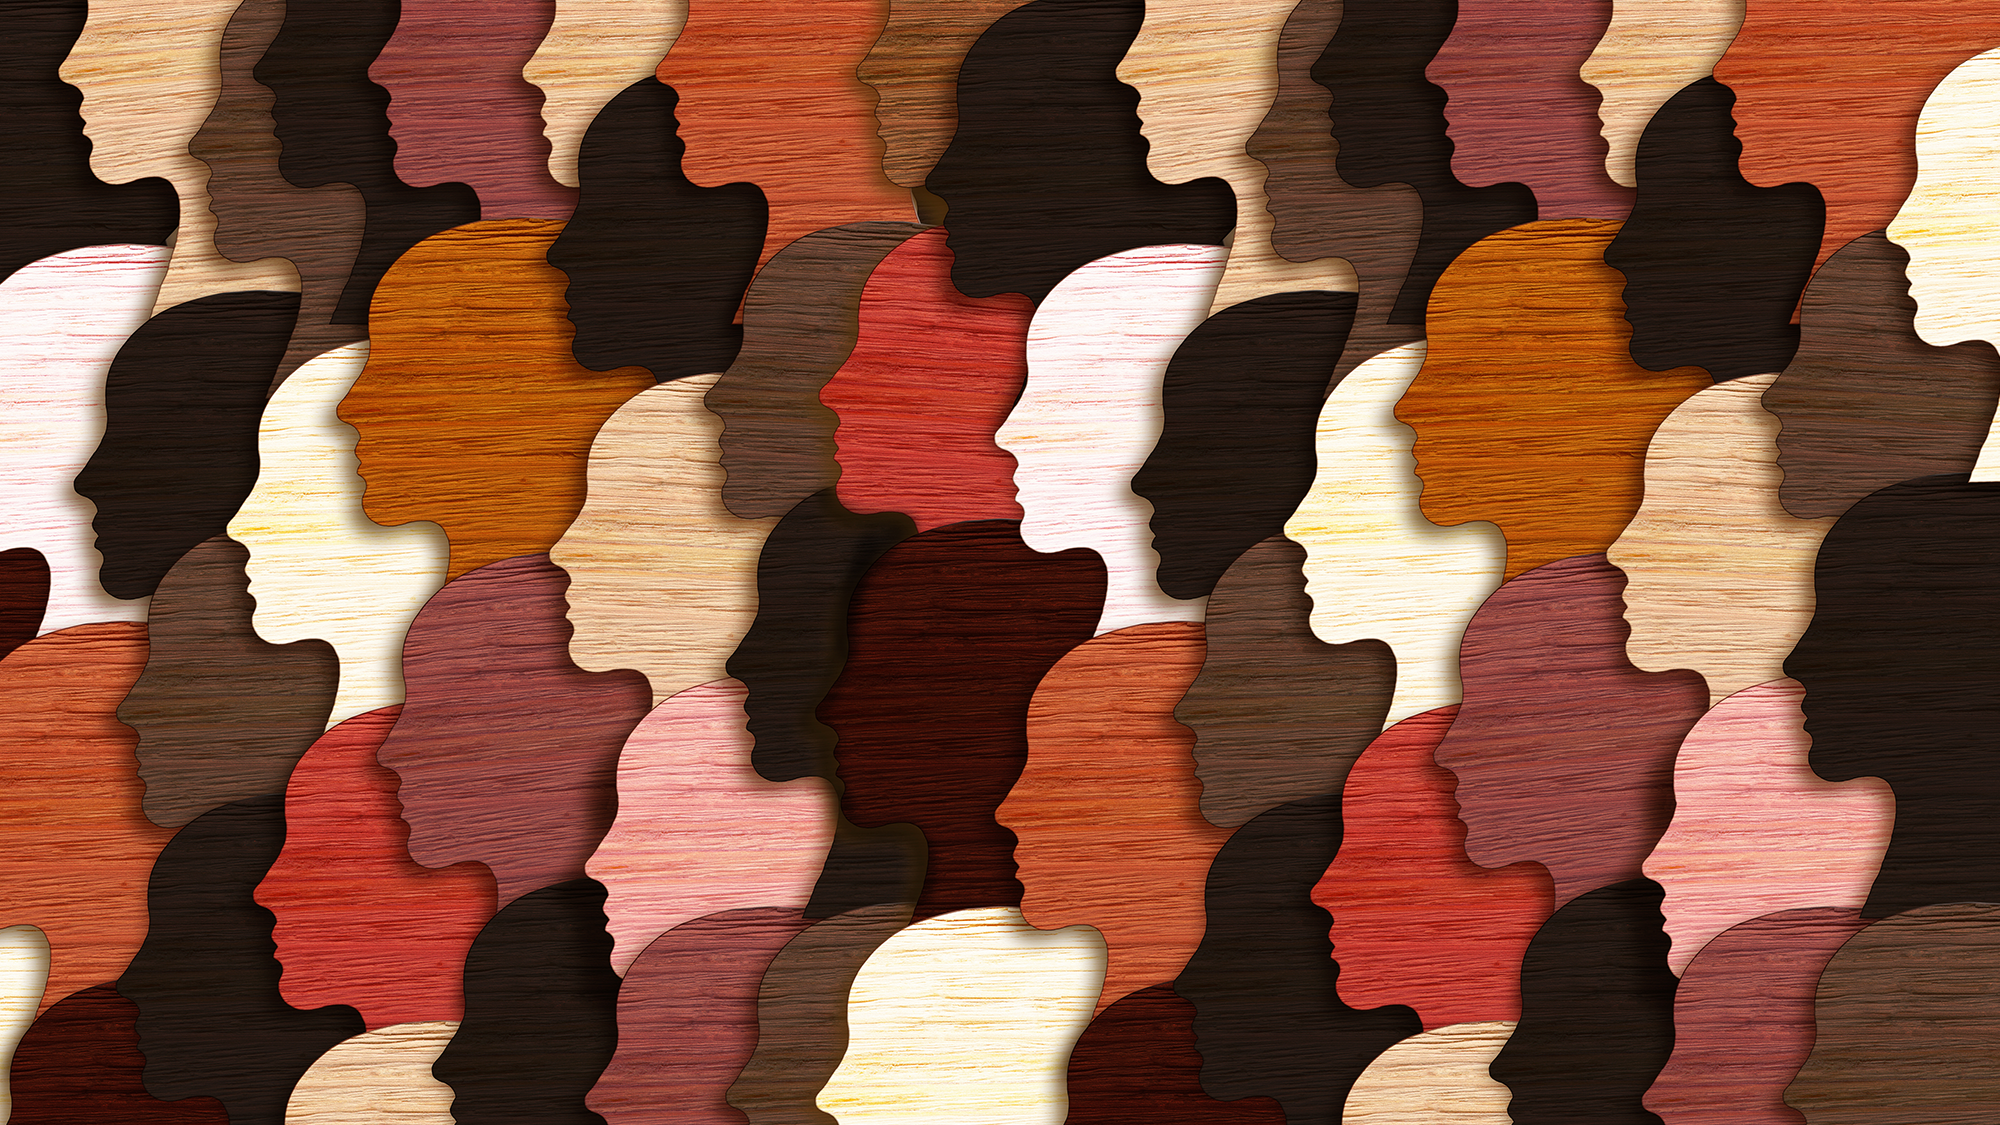 A photoillustration of multiple silhouettes in different skin tone colors representing people of different races and ethnicities